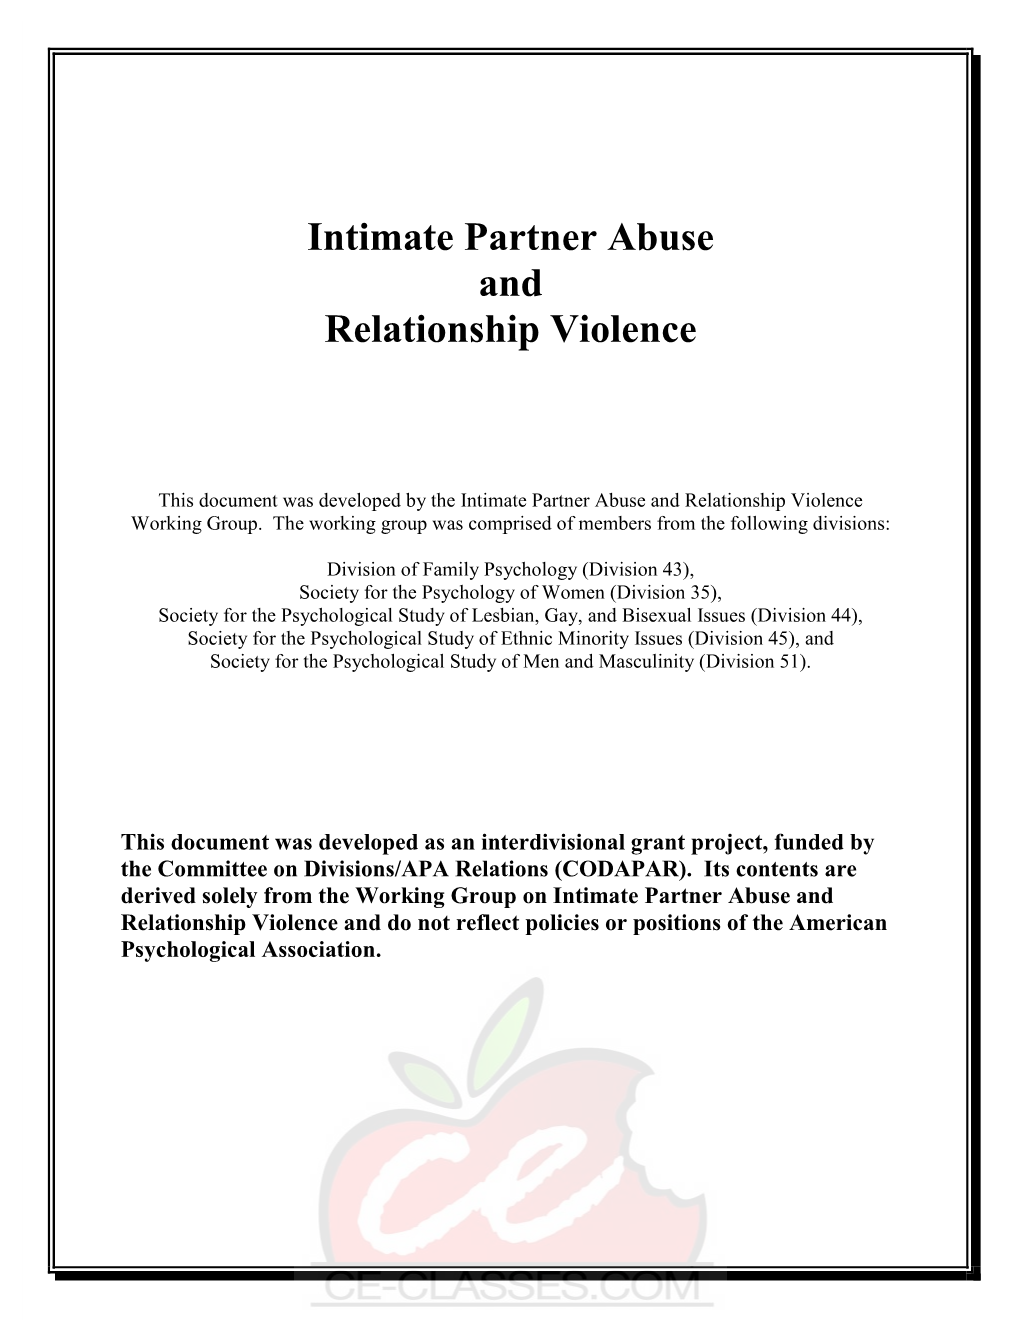 Intimate Partner Abuse and Relationship Violence